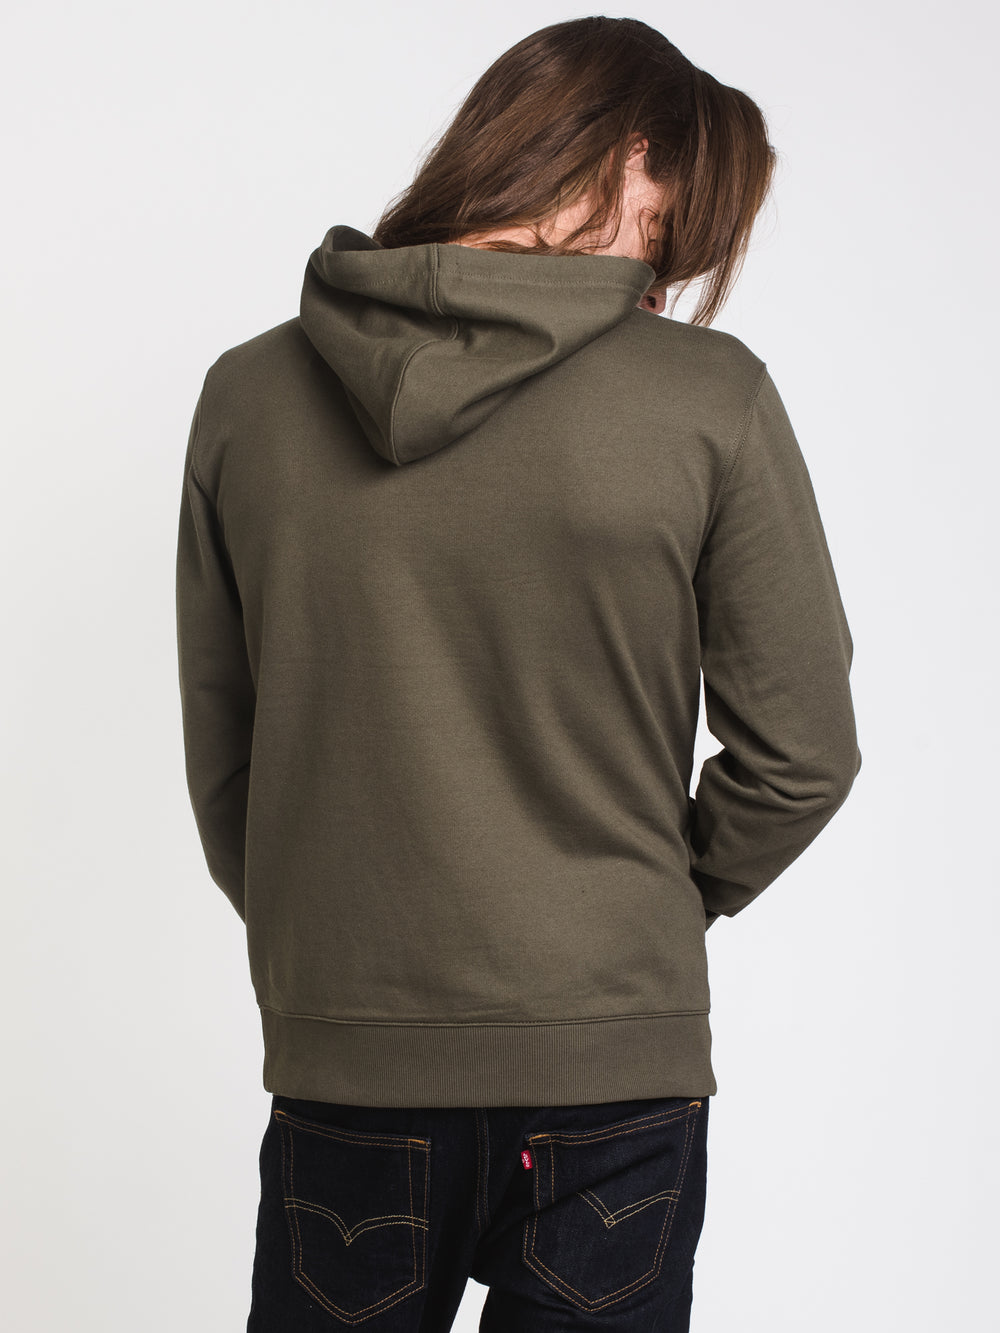 TIMBERLAND EST.LISHED 1973 PULLOVER HOODIE  - CLEARANCE